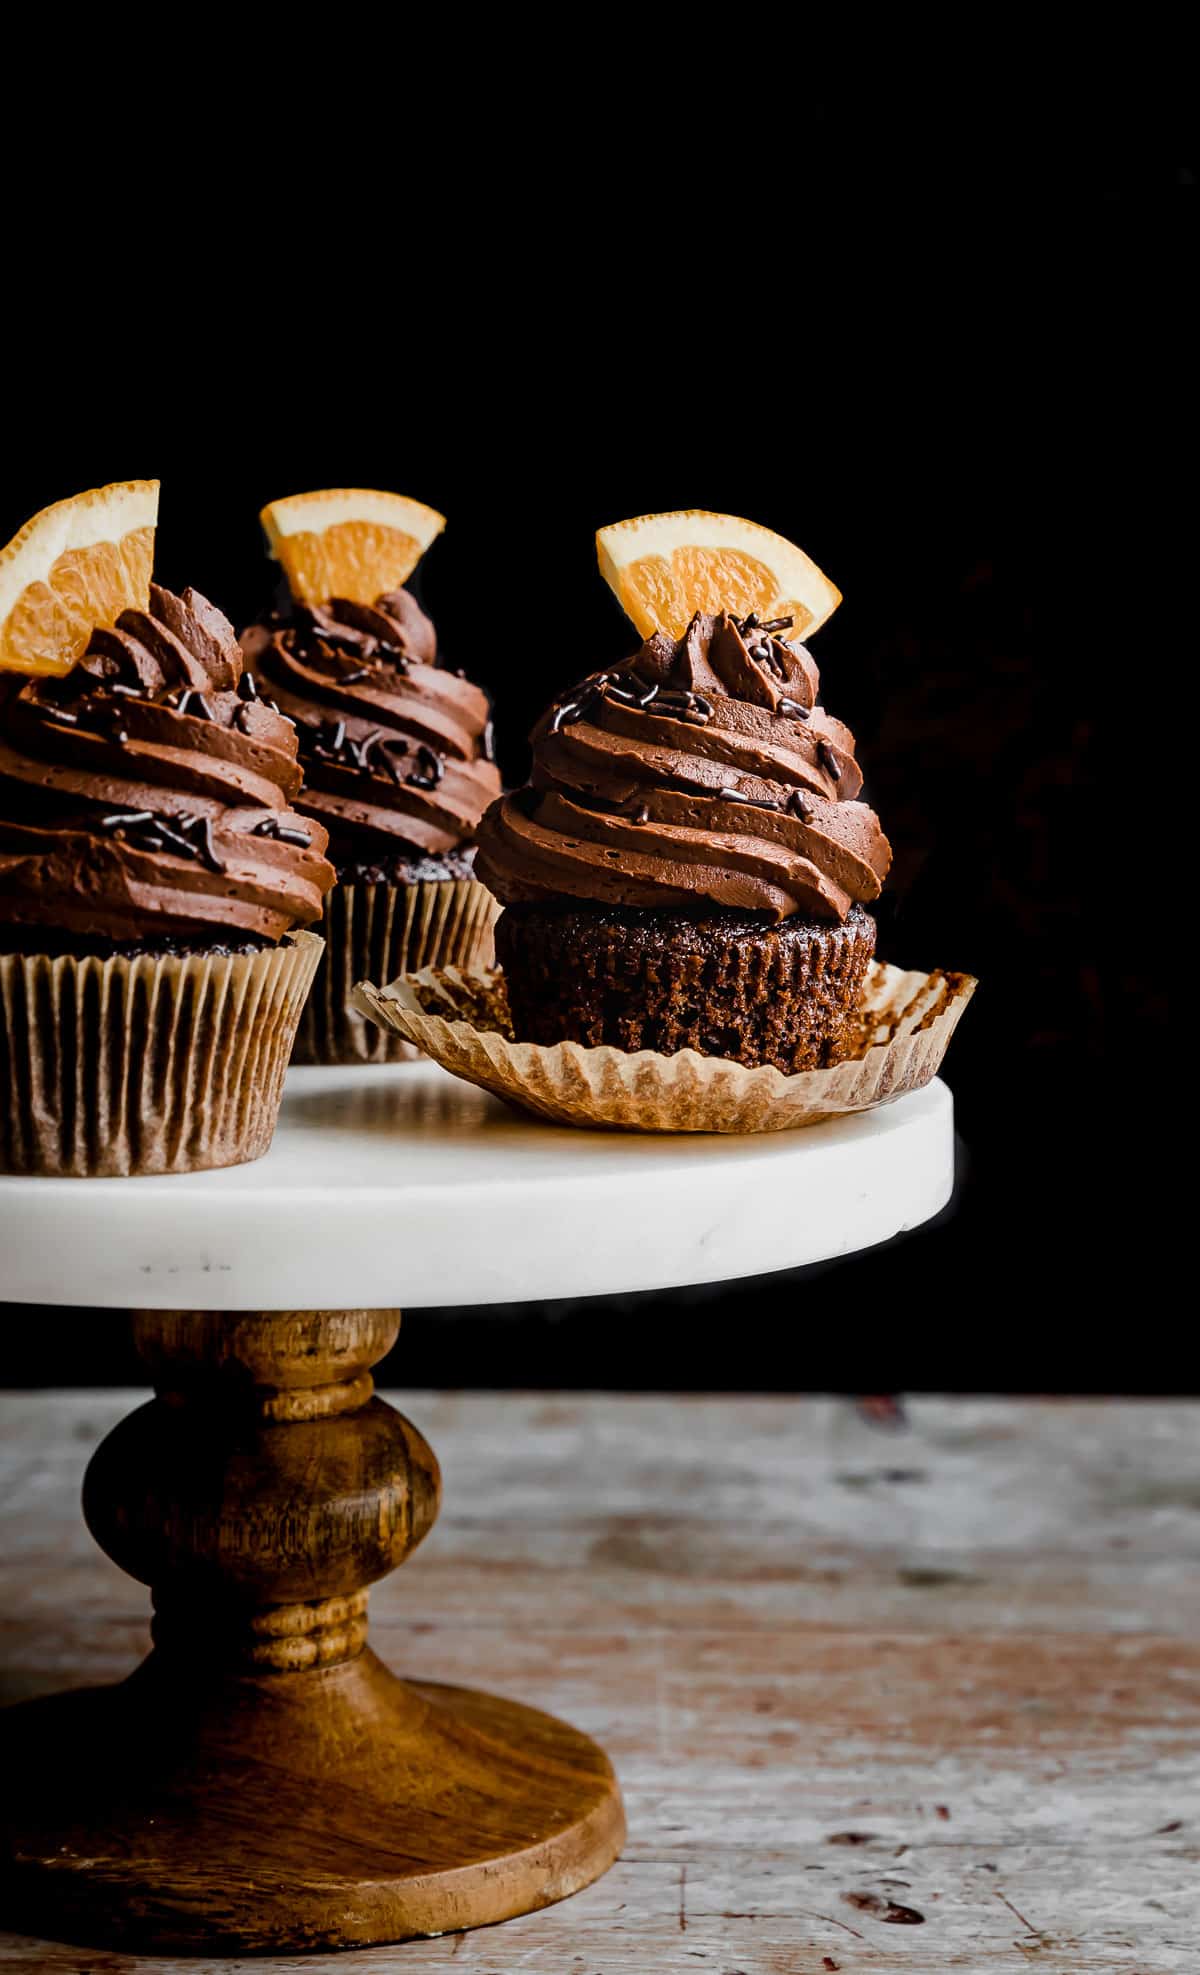 Chocolate Orange Cupcakes on a white marble topped cake stand against a black background.